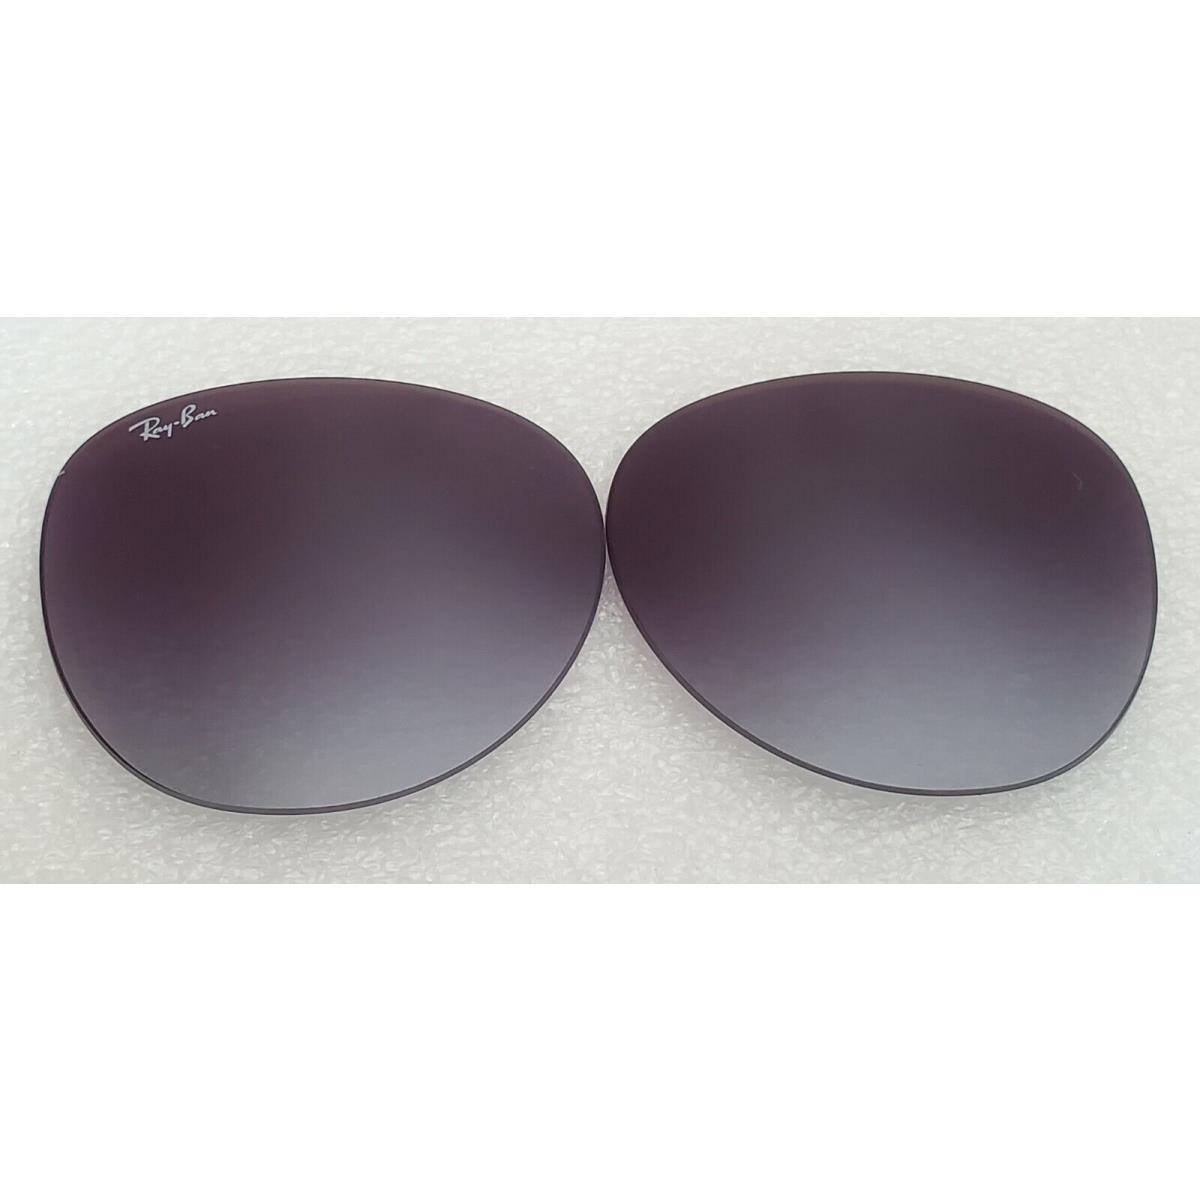 Ray-ban Replacement Lenses RB4285 Grey Gradient 55mm